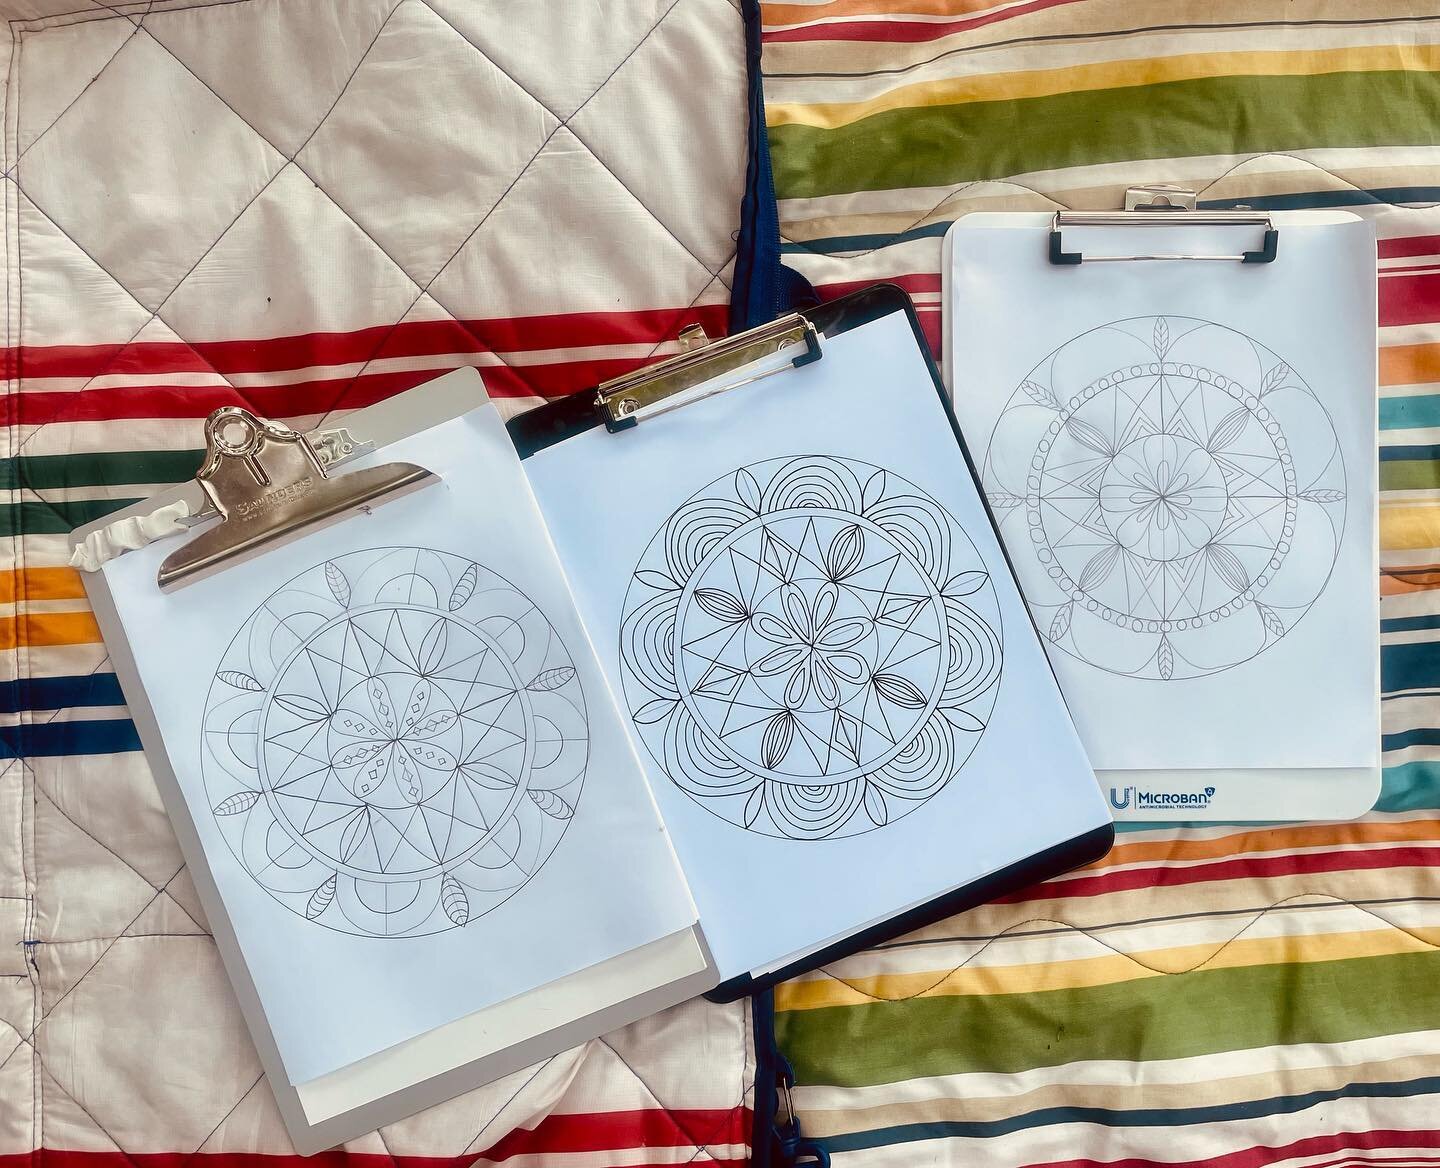 The rain held out yesterday and we were able to enjoy the garden and sit and draw mandalas. I love that we all started with the same framework and each of us made it our own.